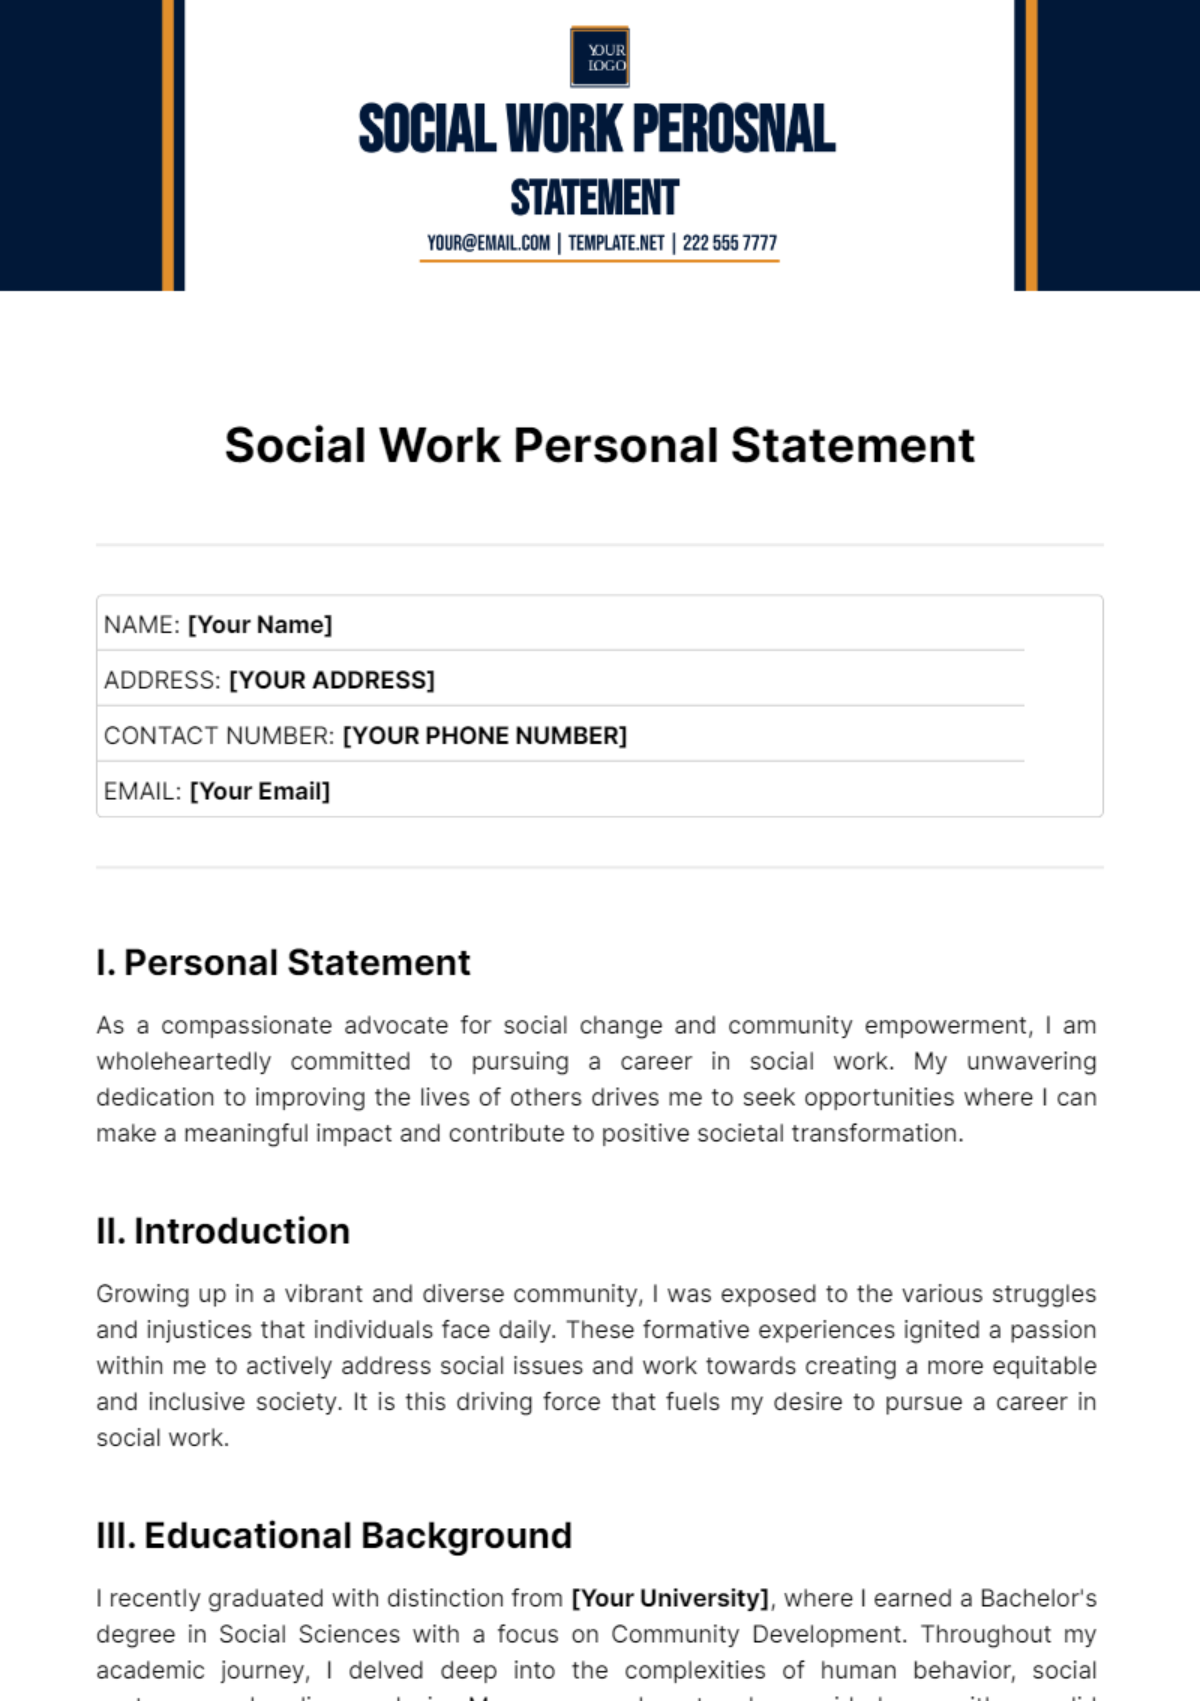 Social Work Personal Statement Template